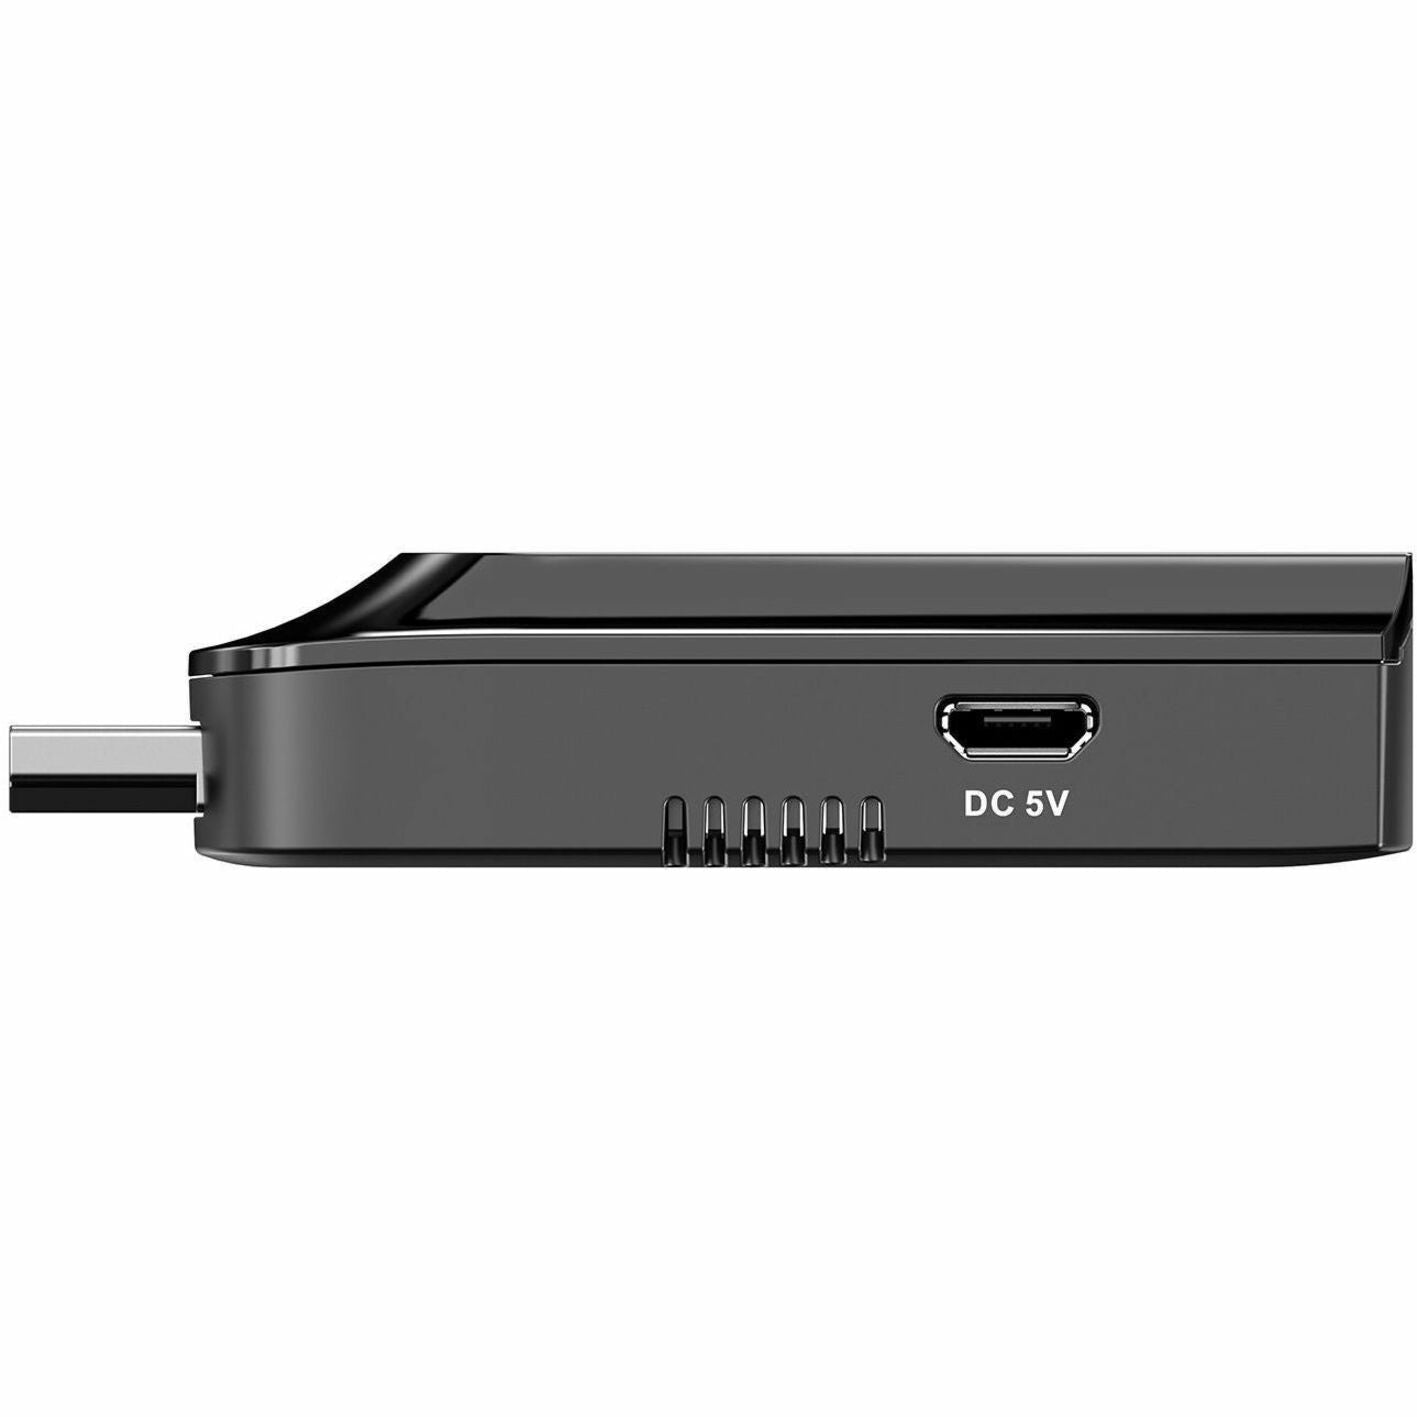 Rocstor Y10G007-B1 USB 3.1 Type-C to HDMI 2.0 Adapter 4K Video Support 2-Year Warranty